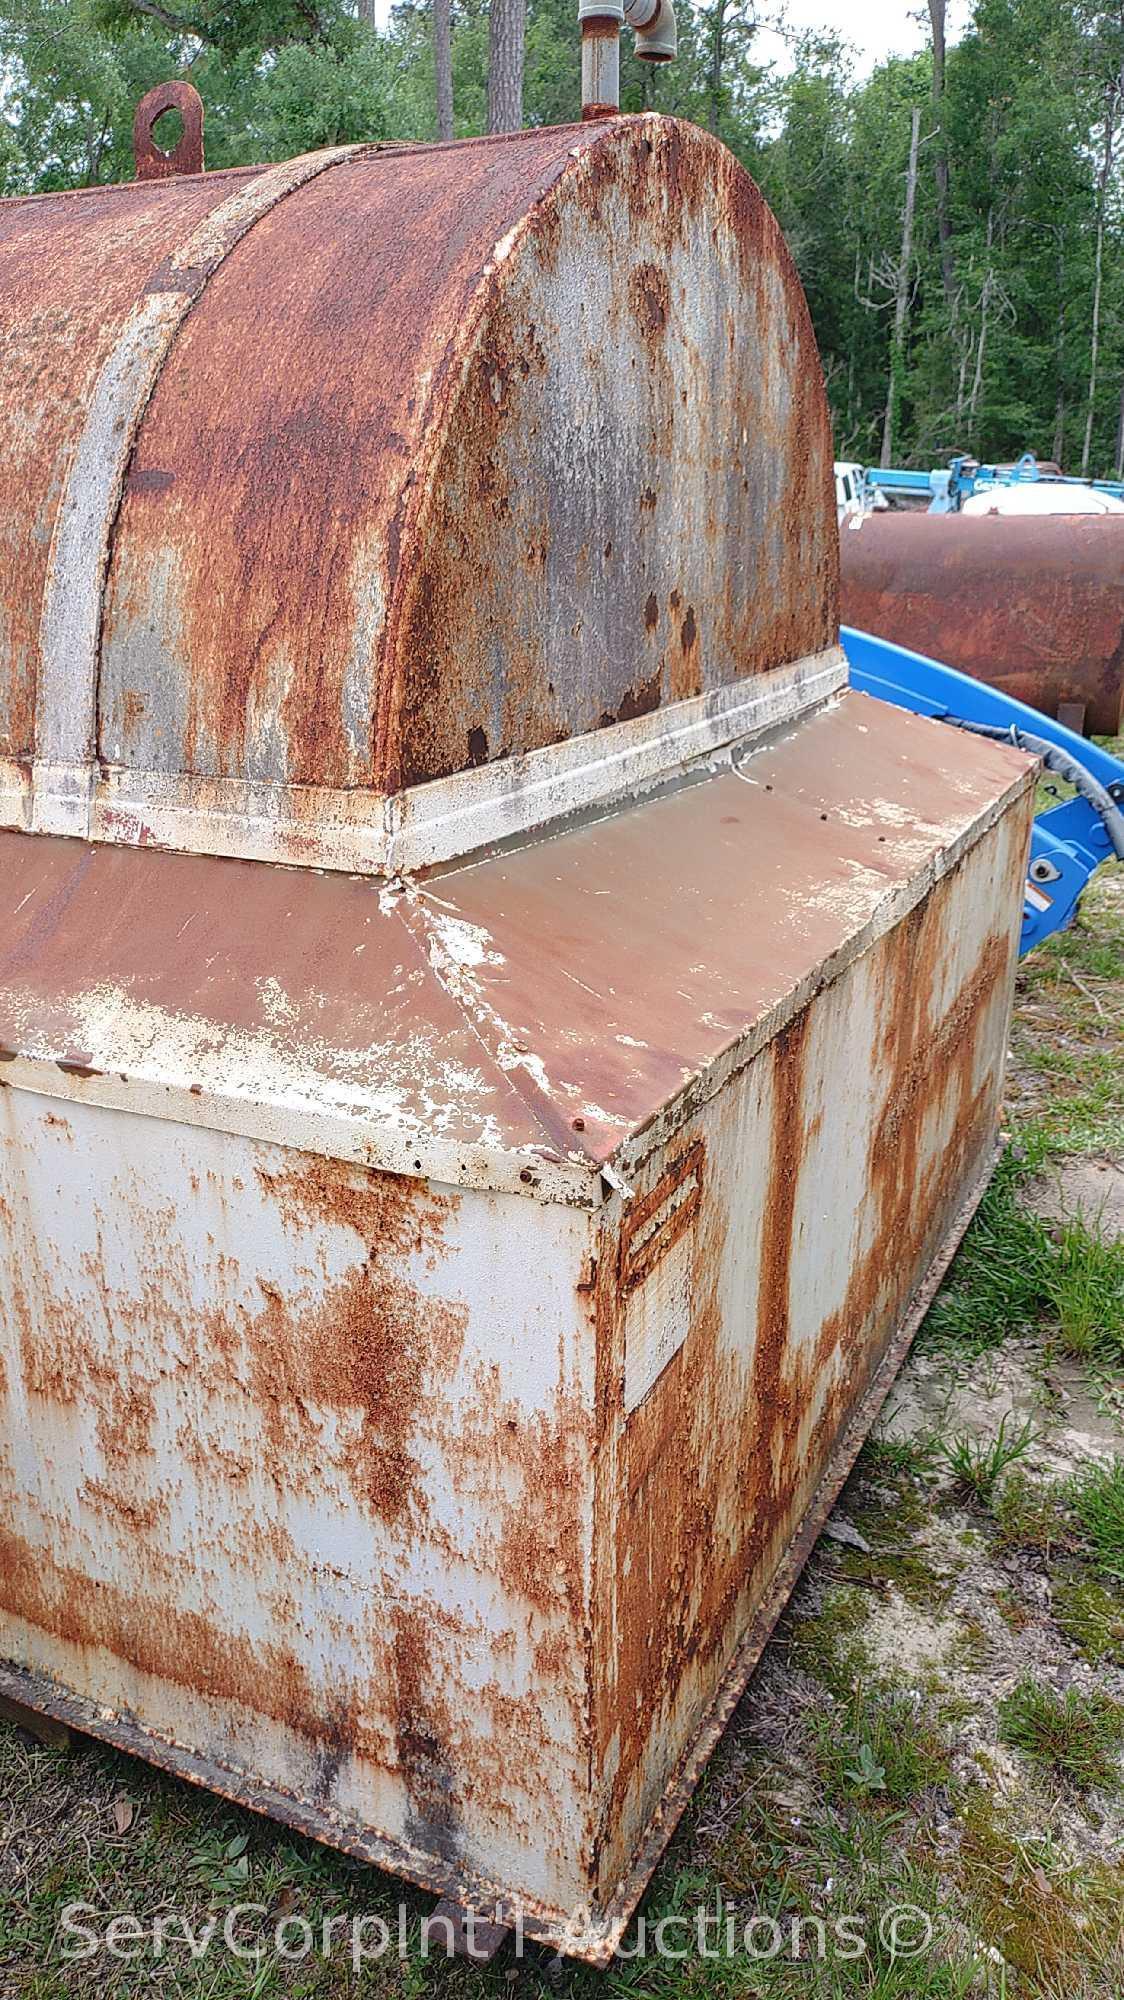 Fuel Tank, Unknown Gallons or Brand, Customer Must Load Themselves (Seller: City of Slidell)